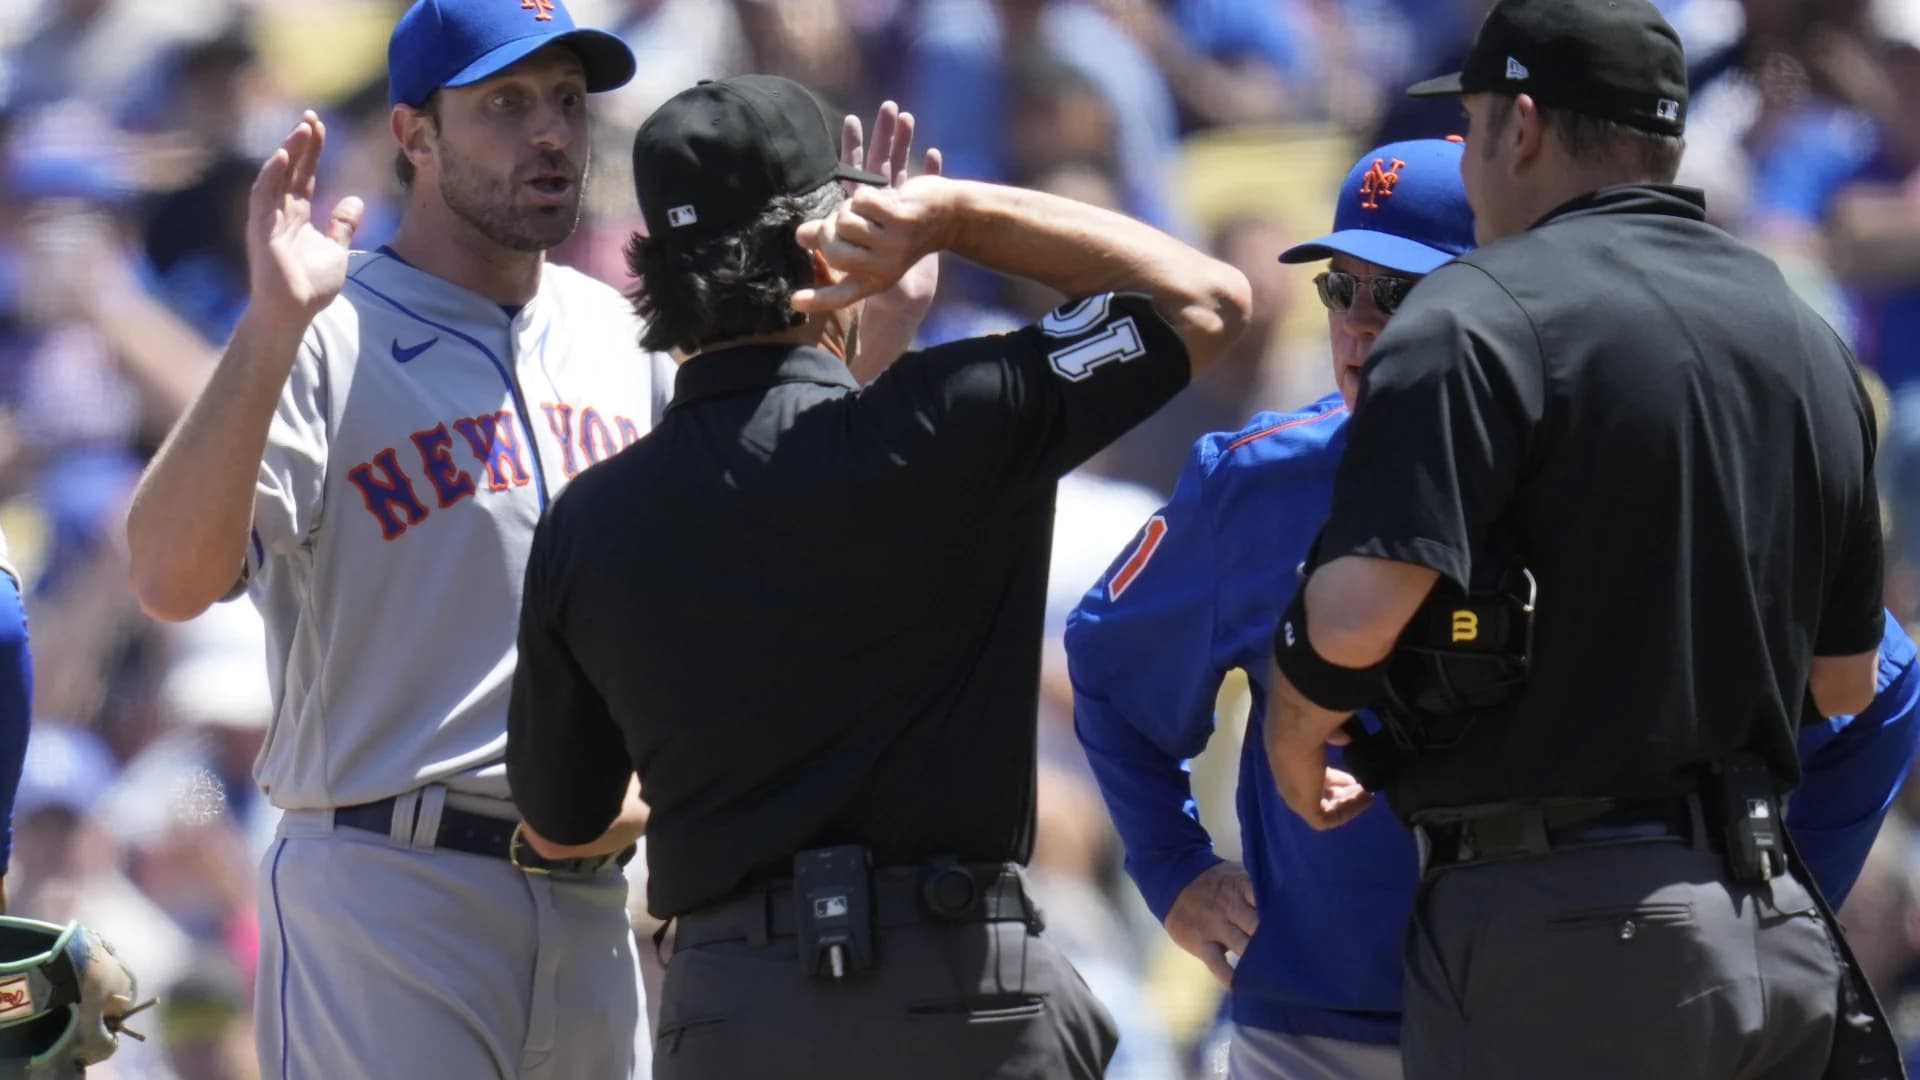 Mets' Scherzer ejected for sticky stuff after umpire check